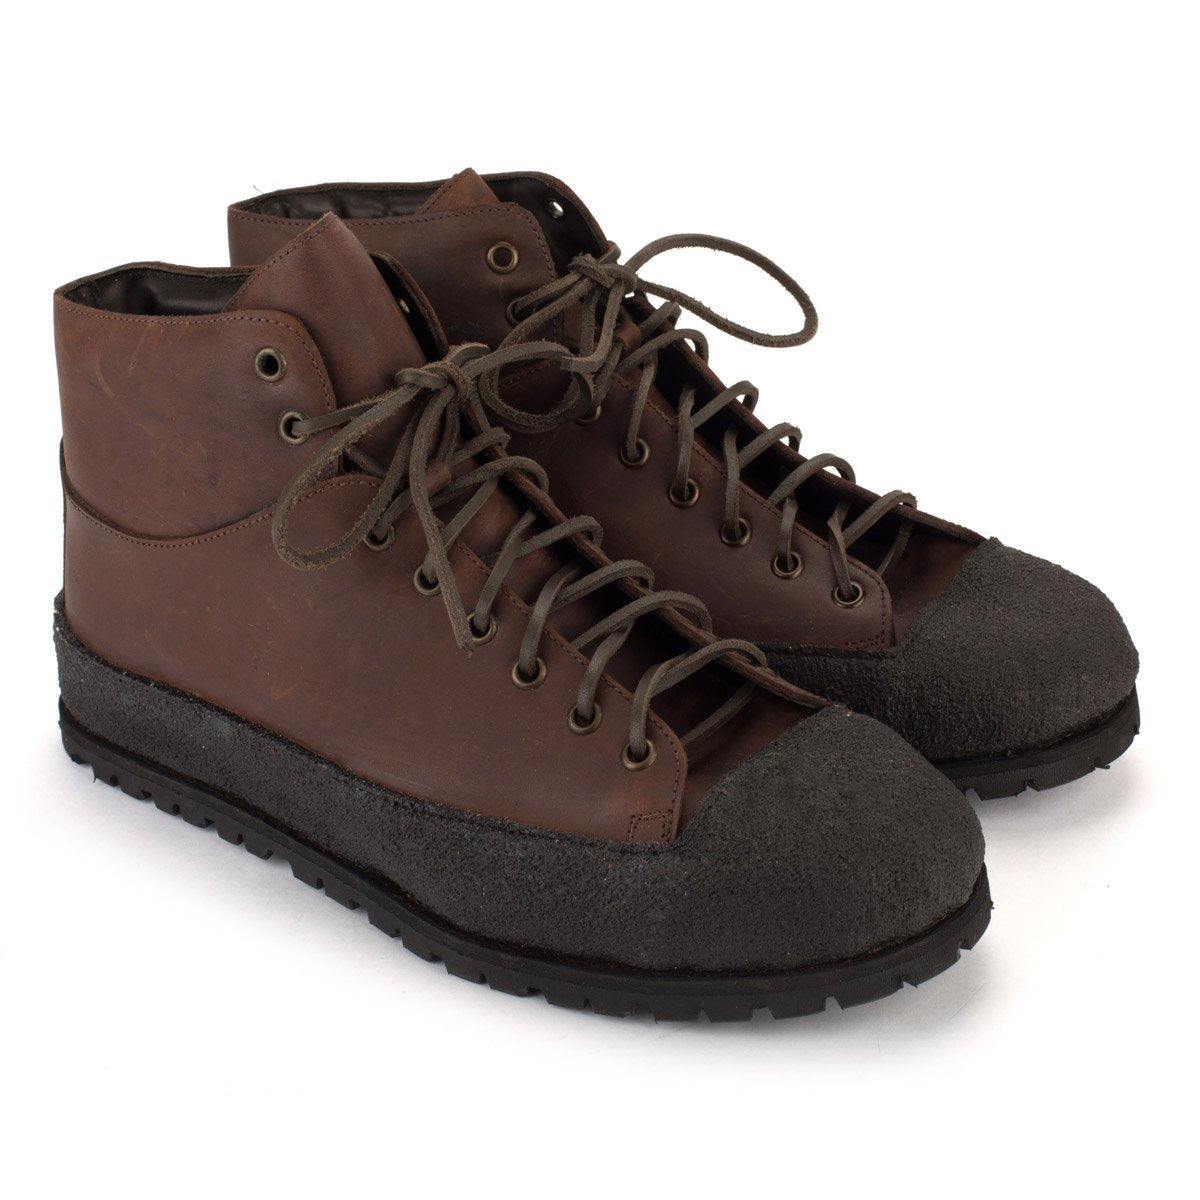 CR 24 M WATER PROOF BOOTS – Cinnamon